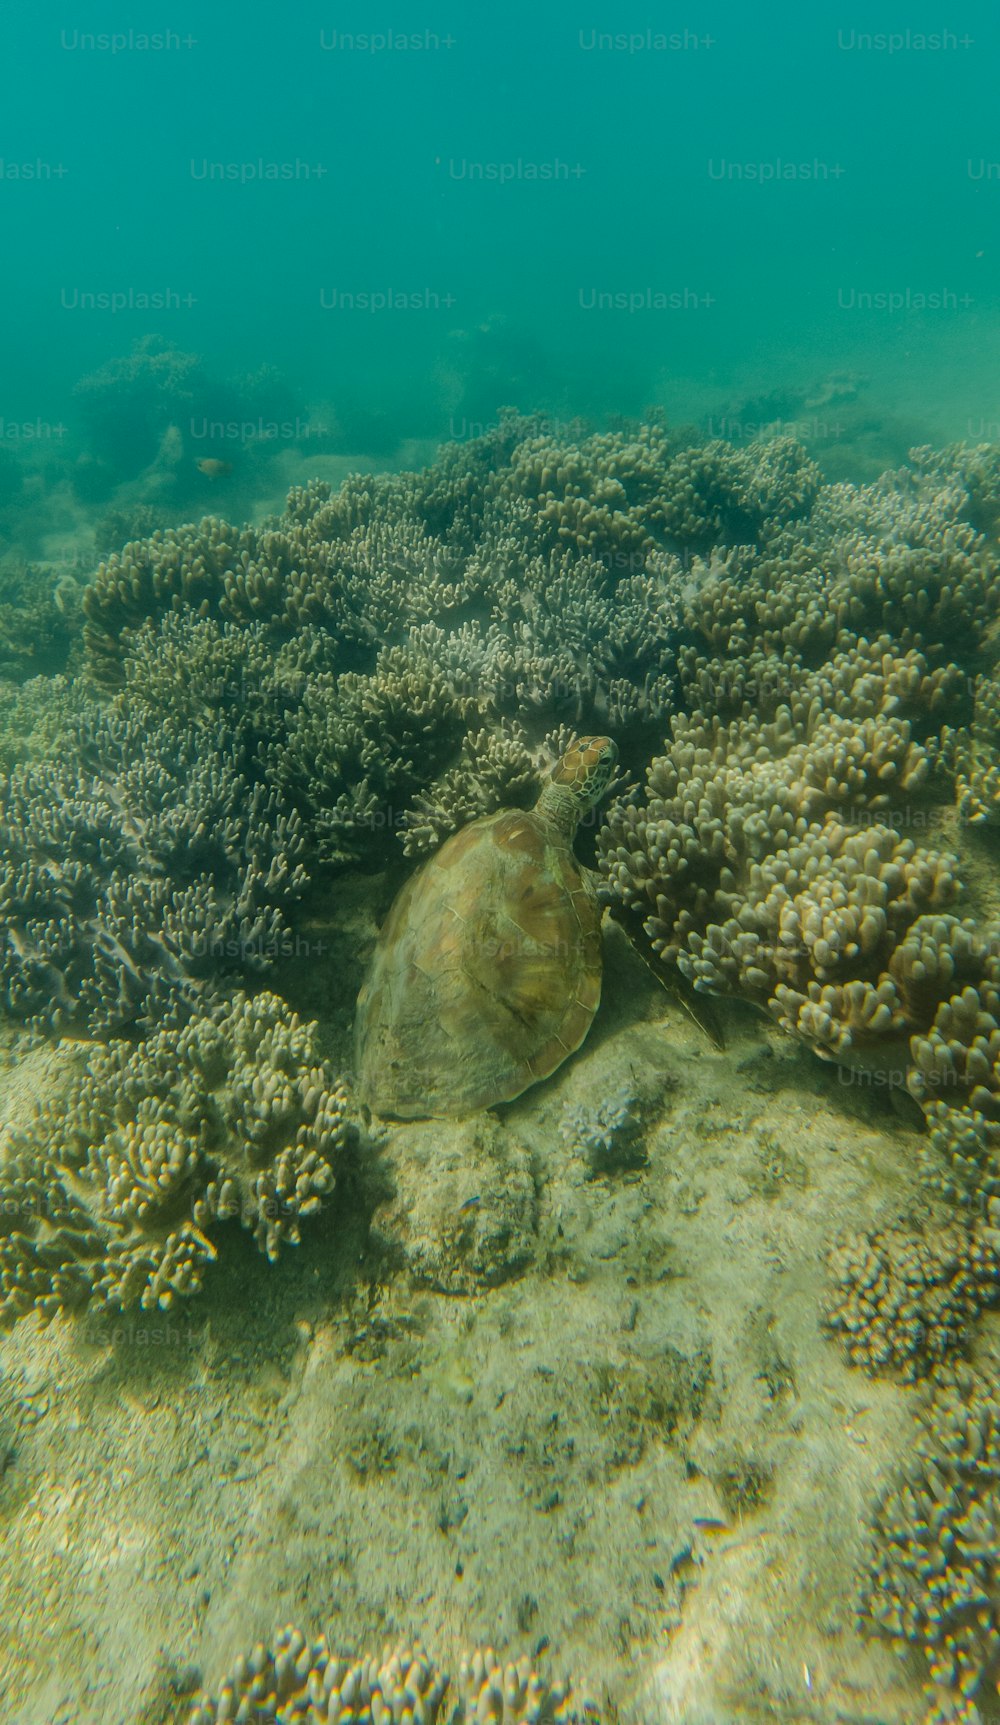 a turtle swimming in the ocean